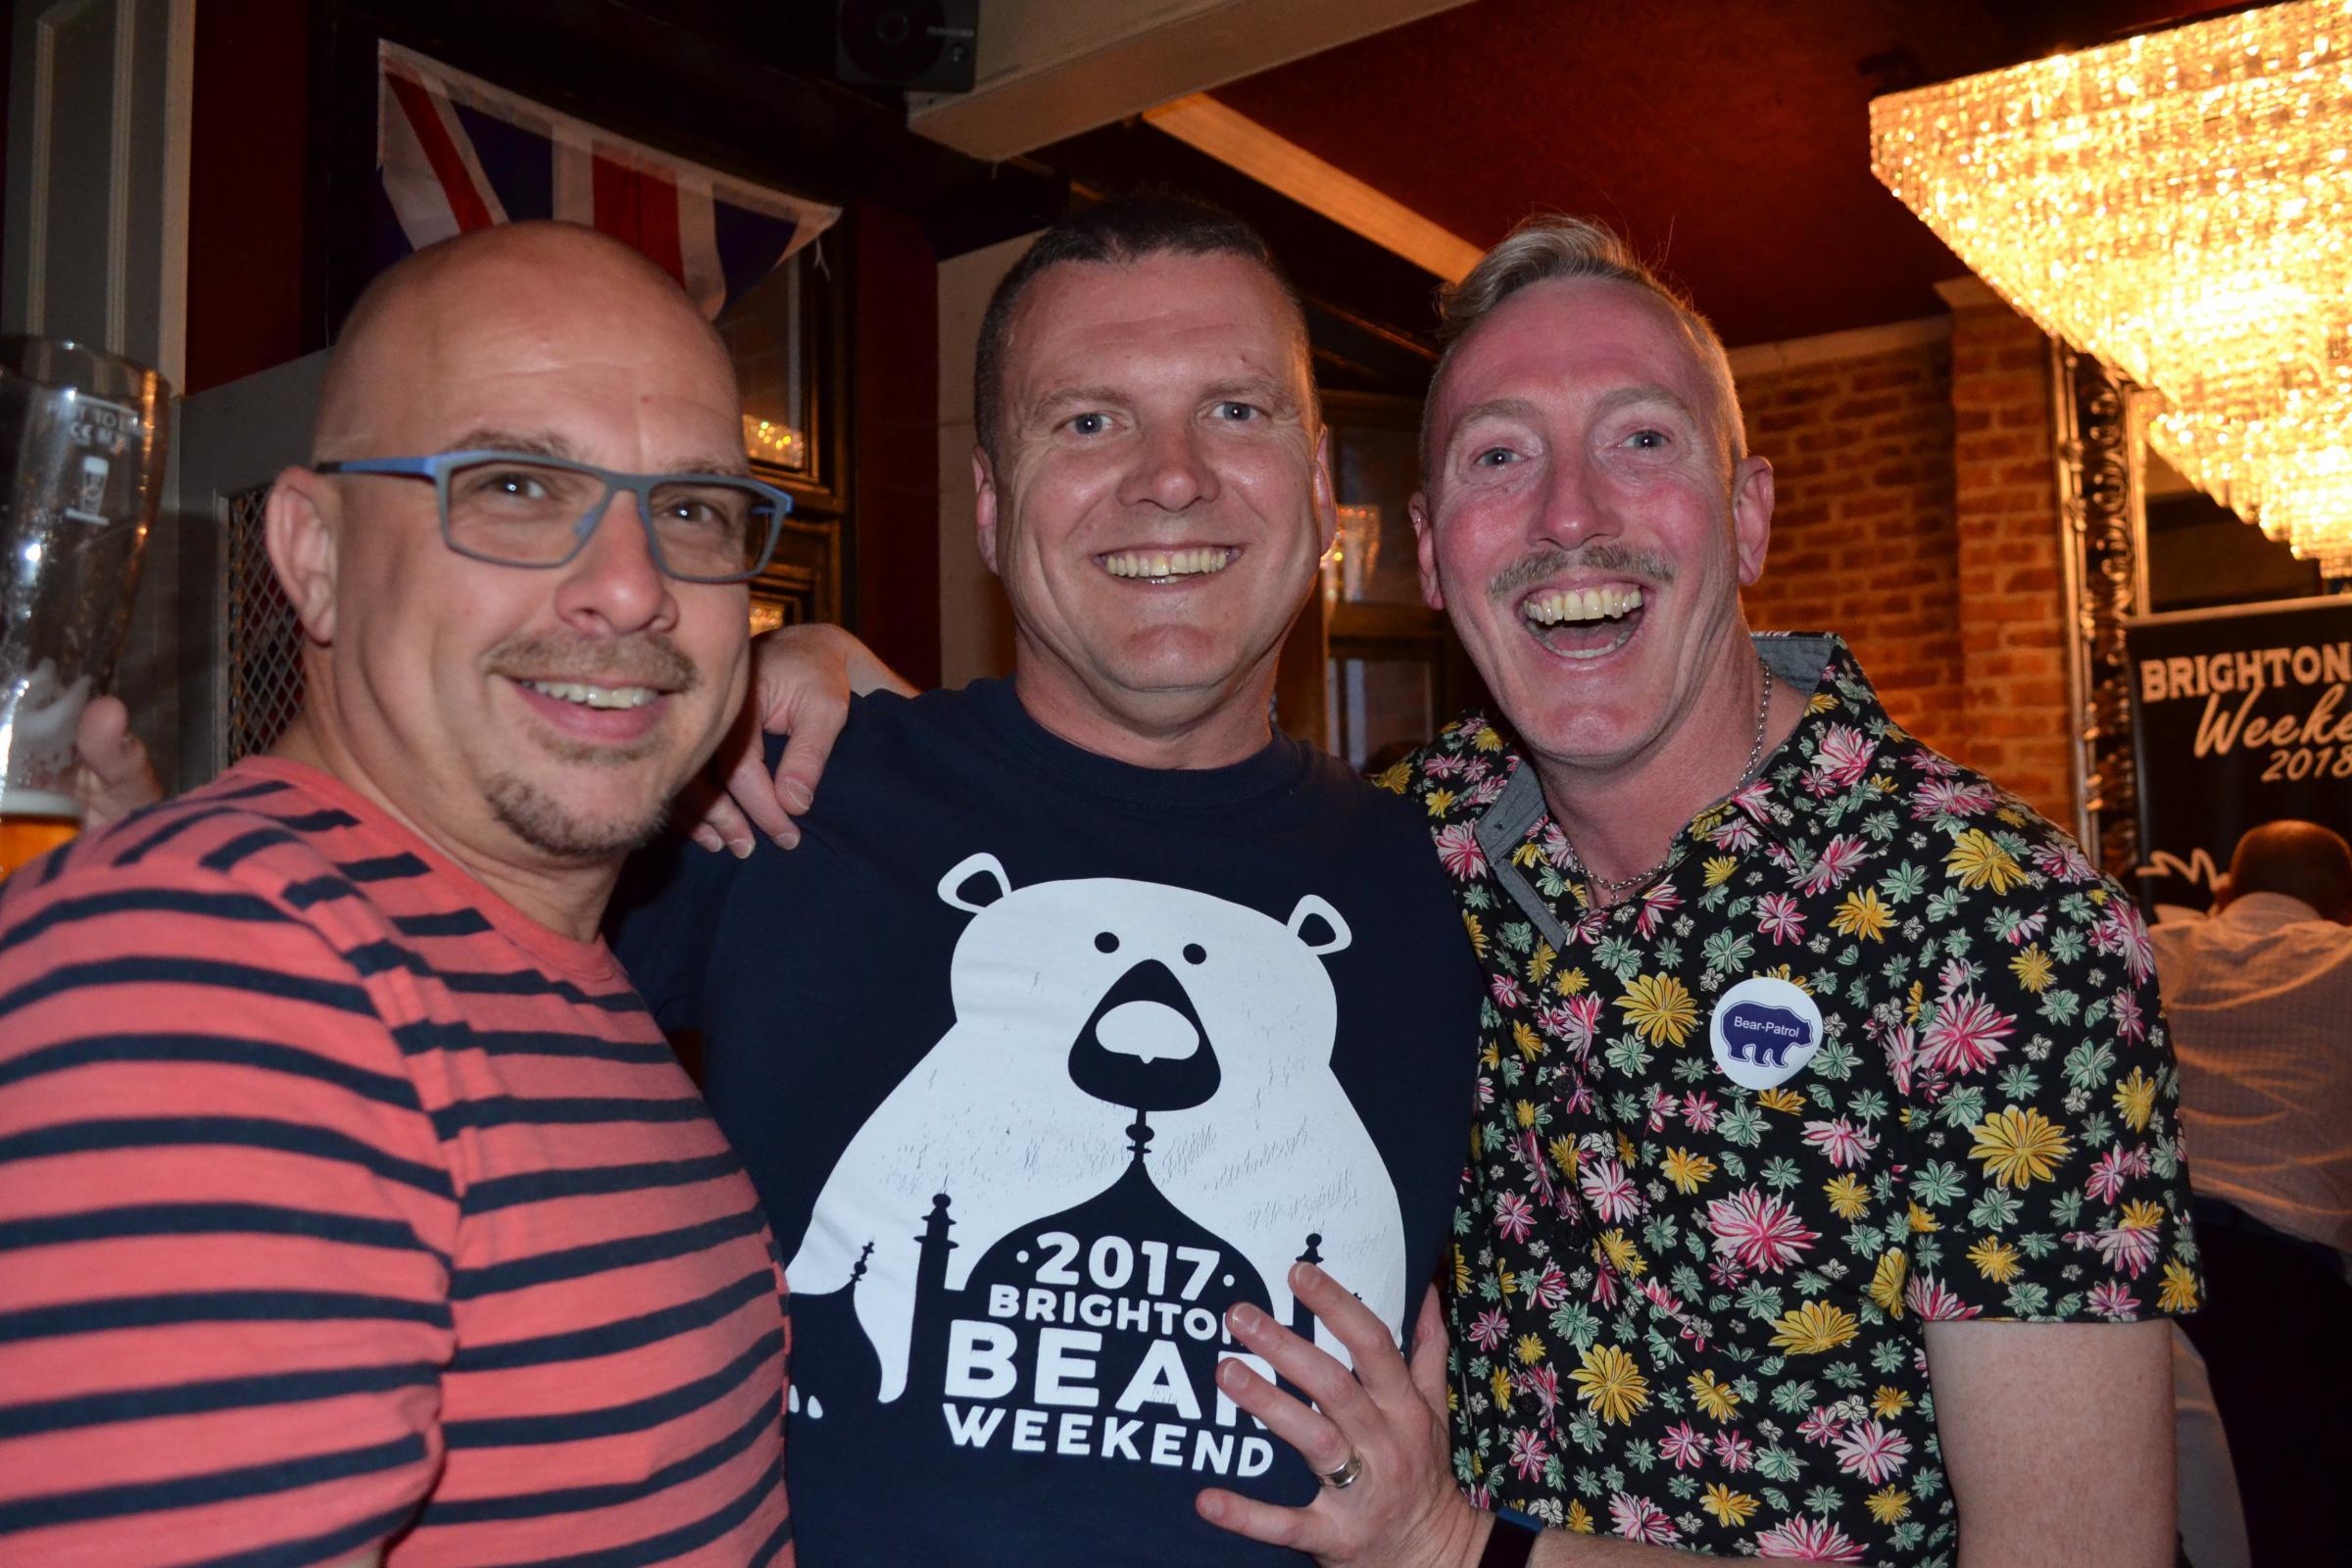 Brighton Bear Weekend is returning to the citys LGBT calendar this July 2021